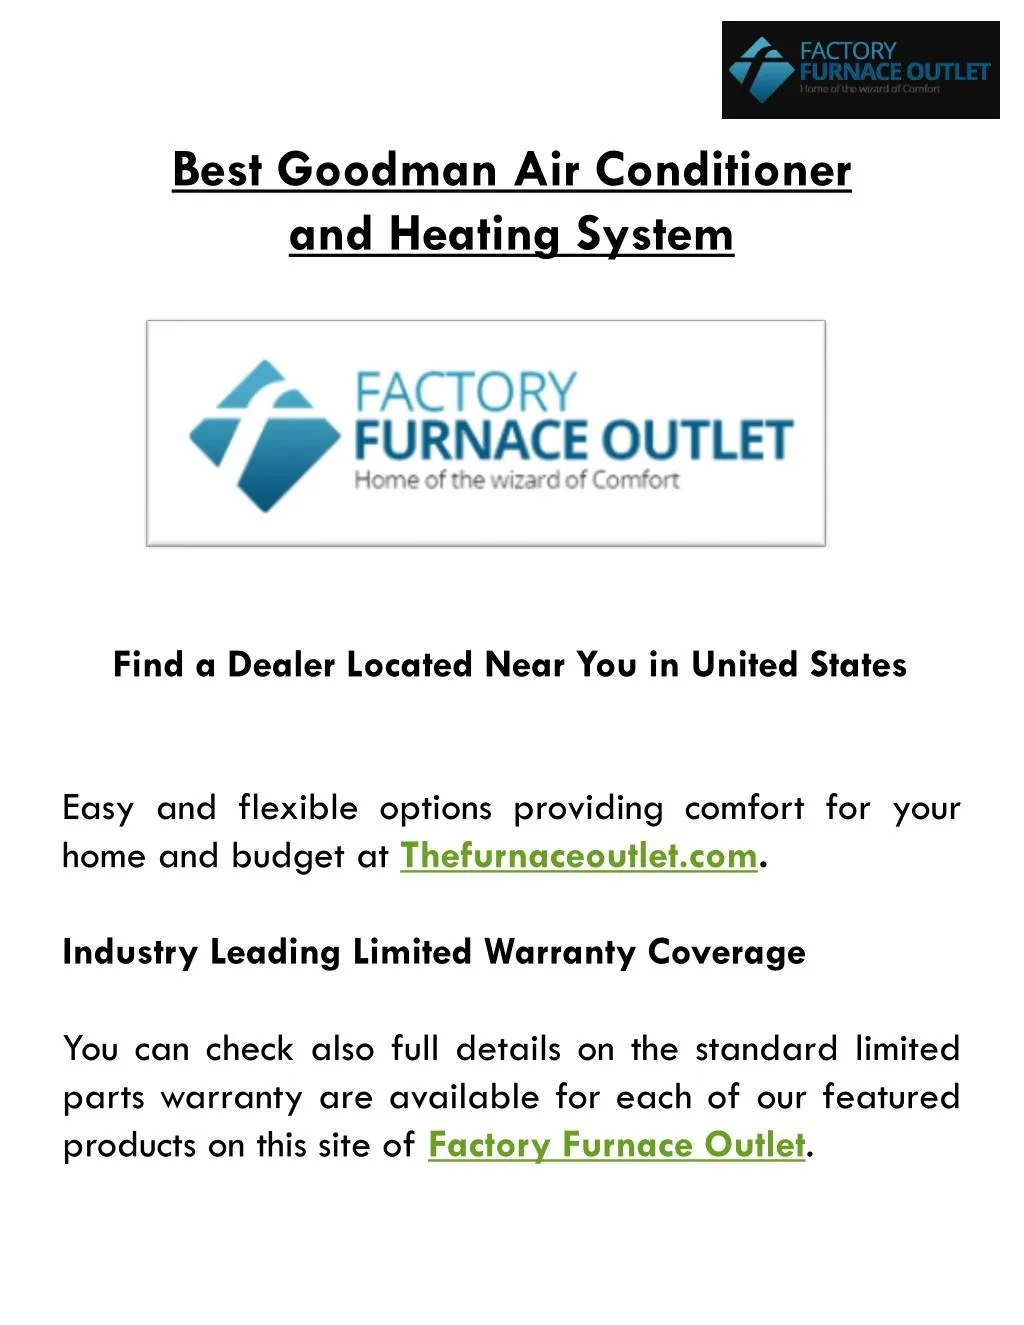 best goodman air conditioner and heating system